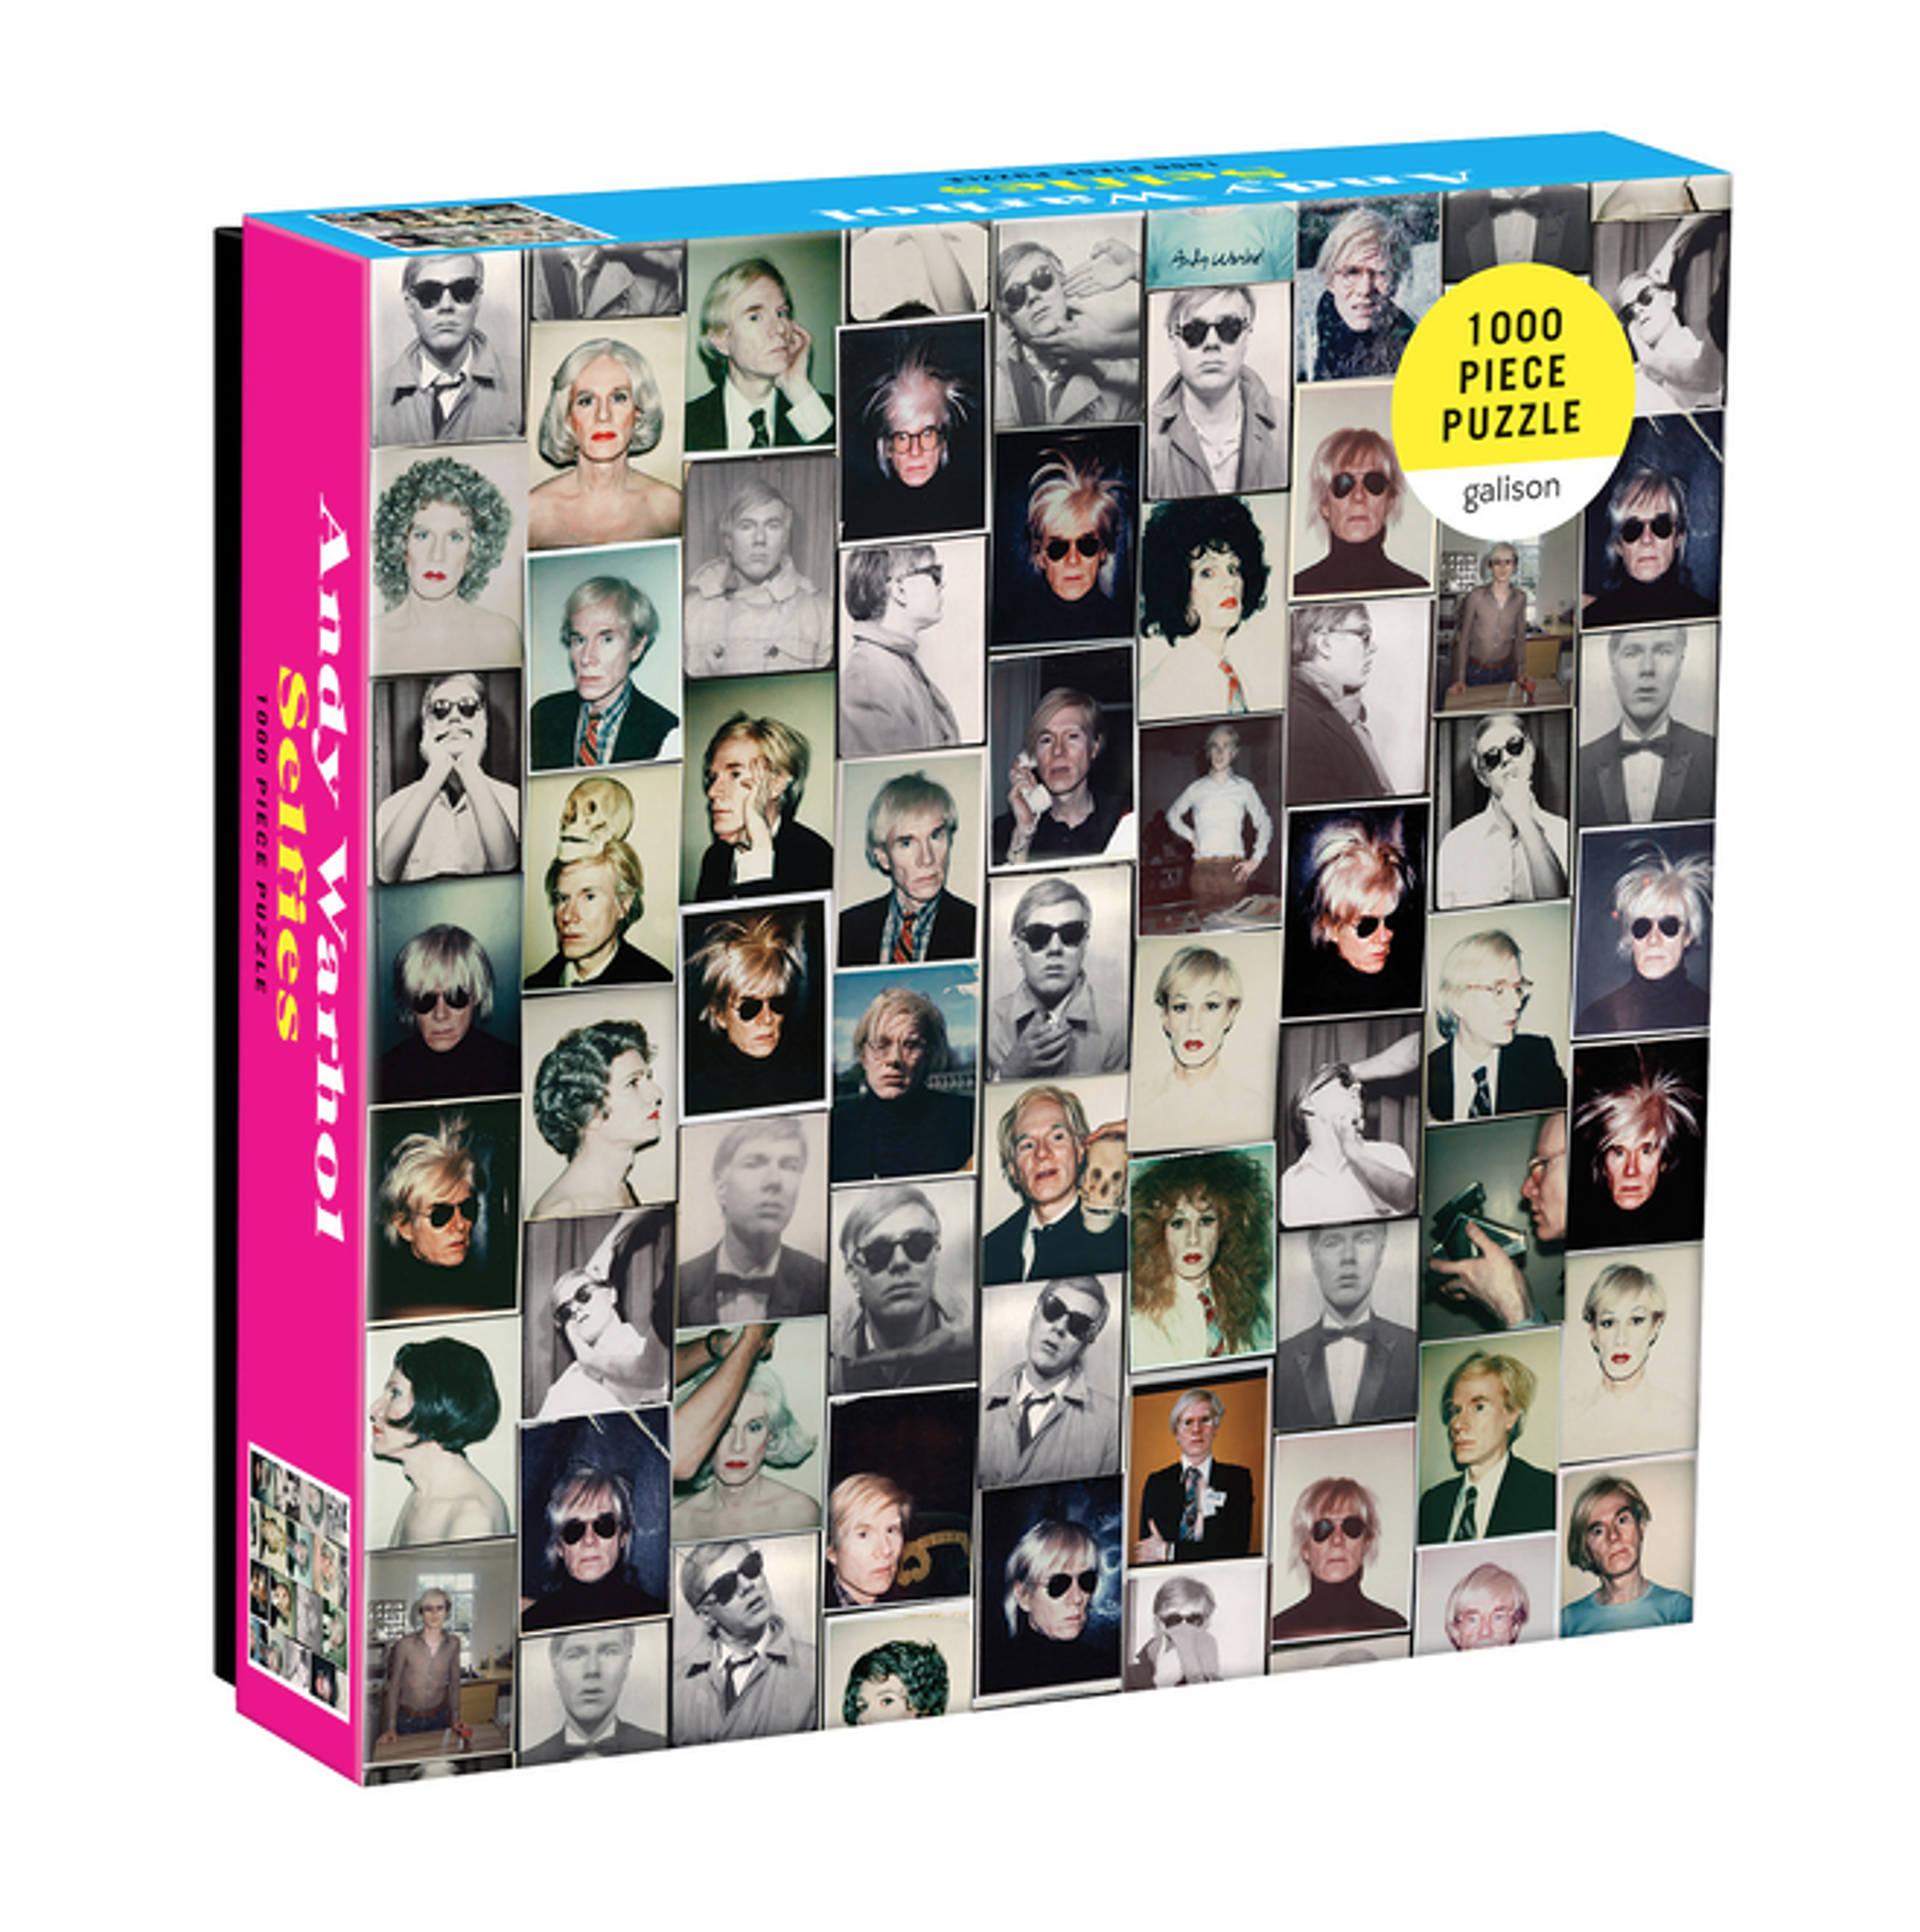 Andy Warhol Selfies 1000 Piece Puzzle in a Square Box by Andy Warhol